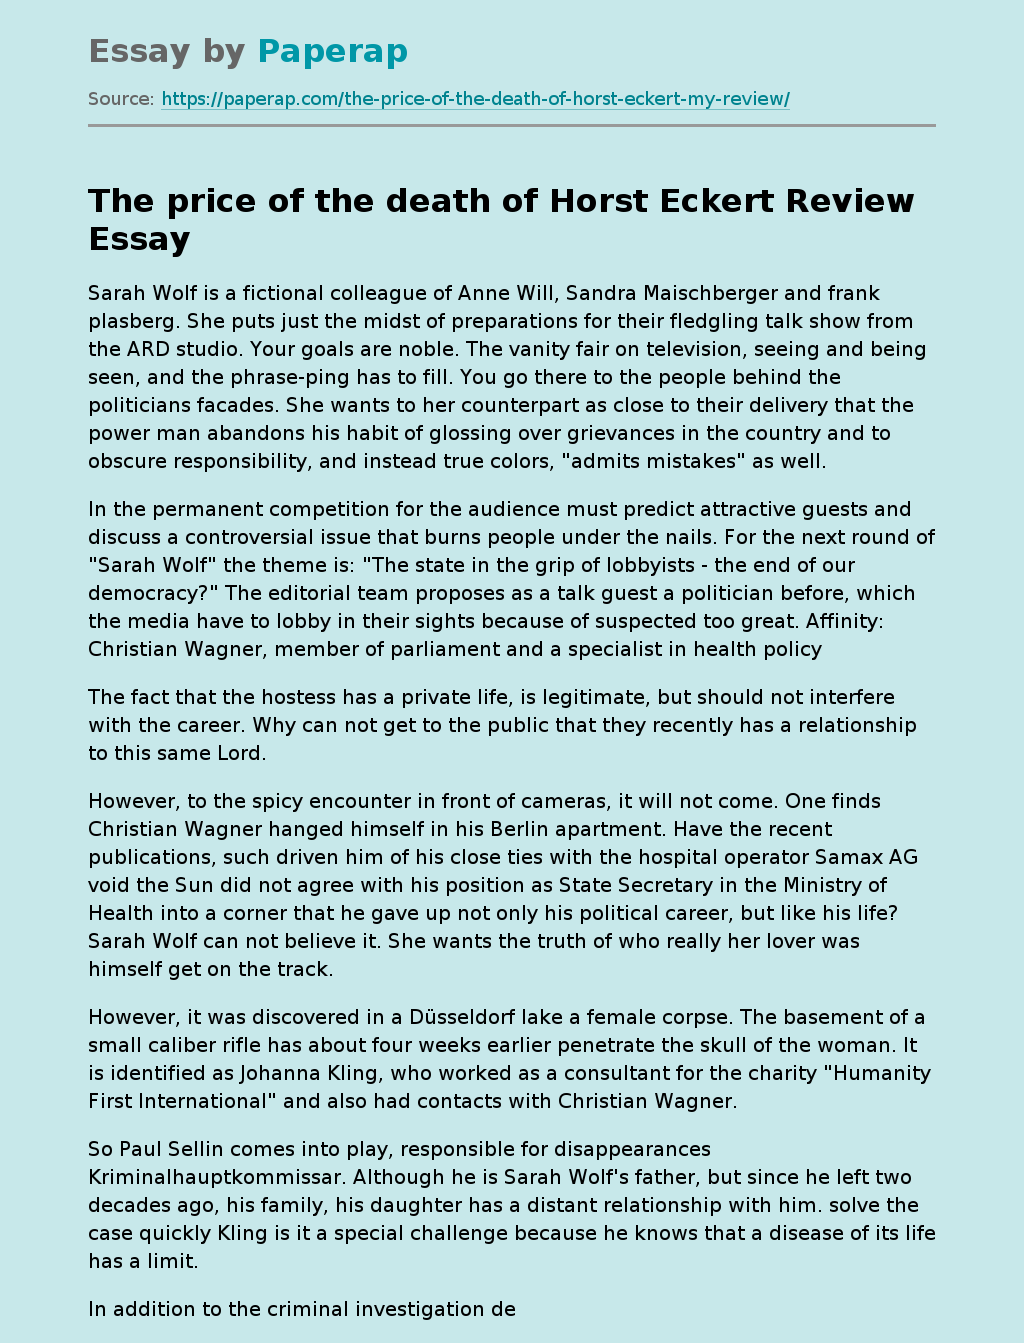 The price of the death of Horst Eckert Review